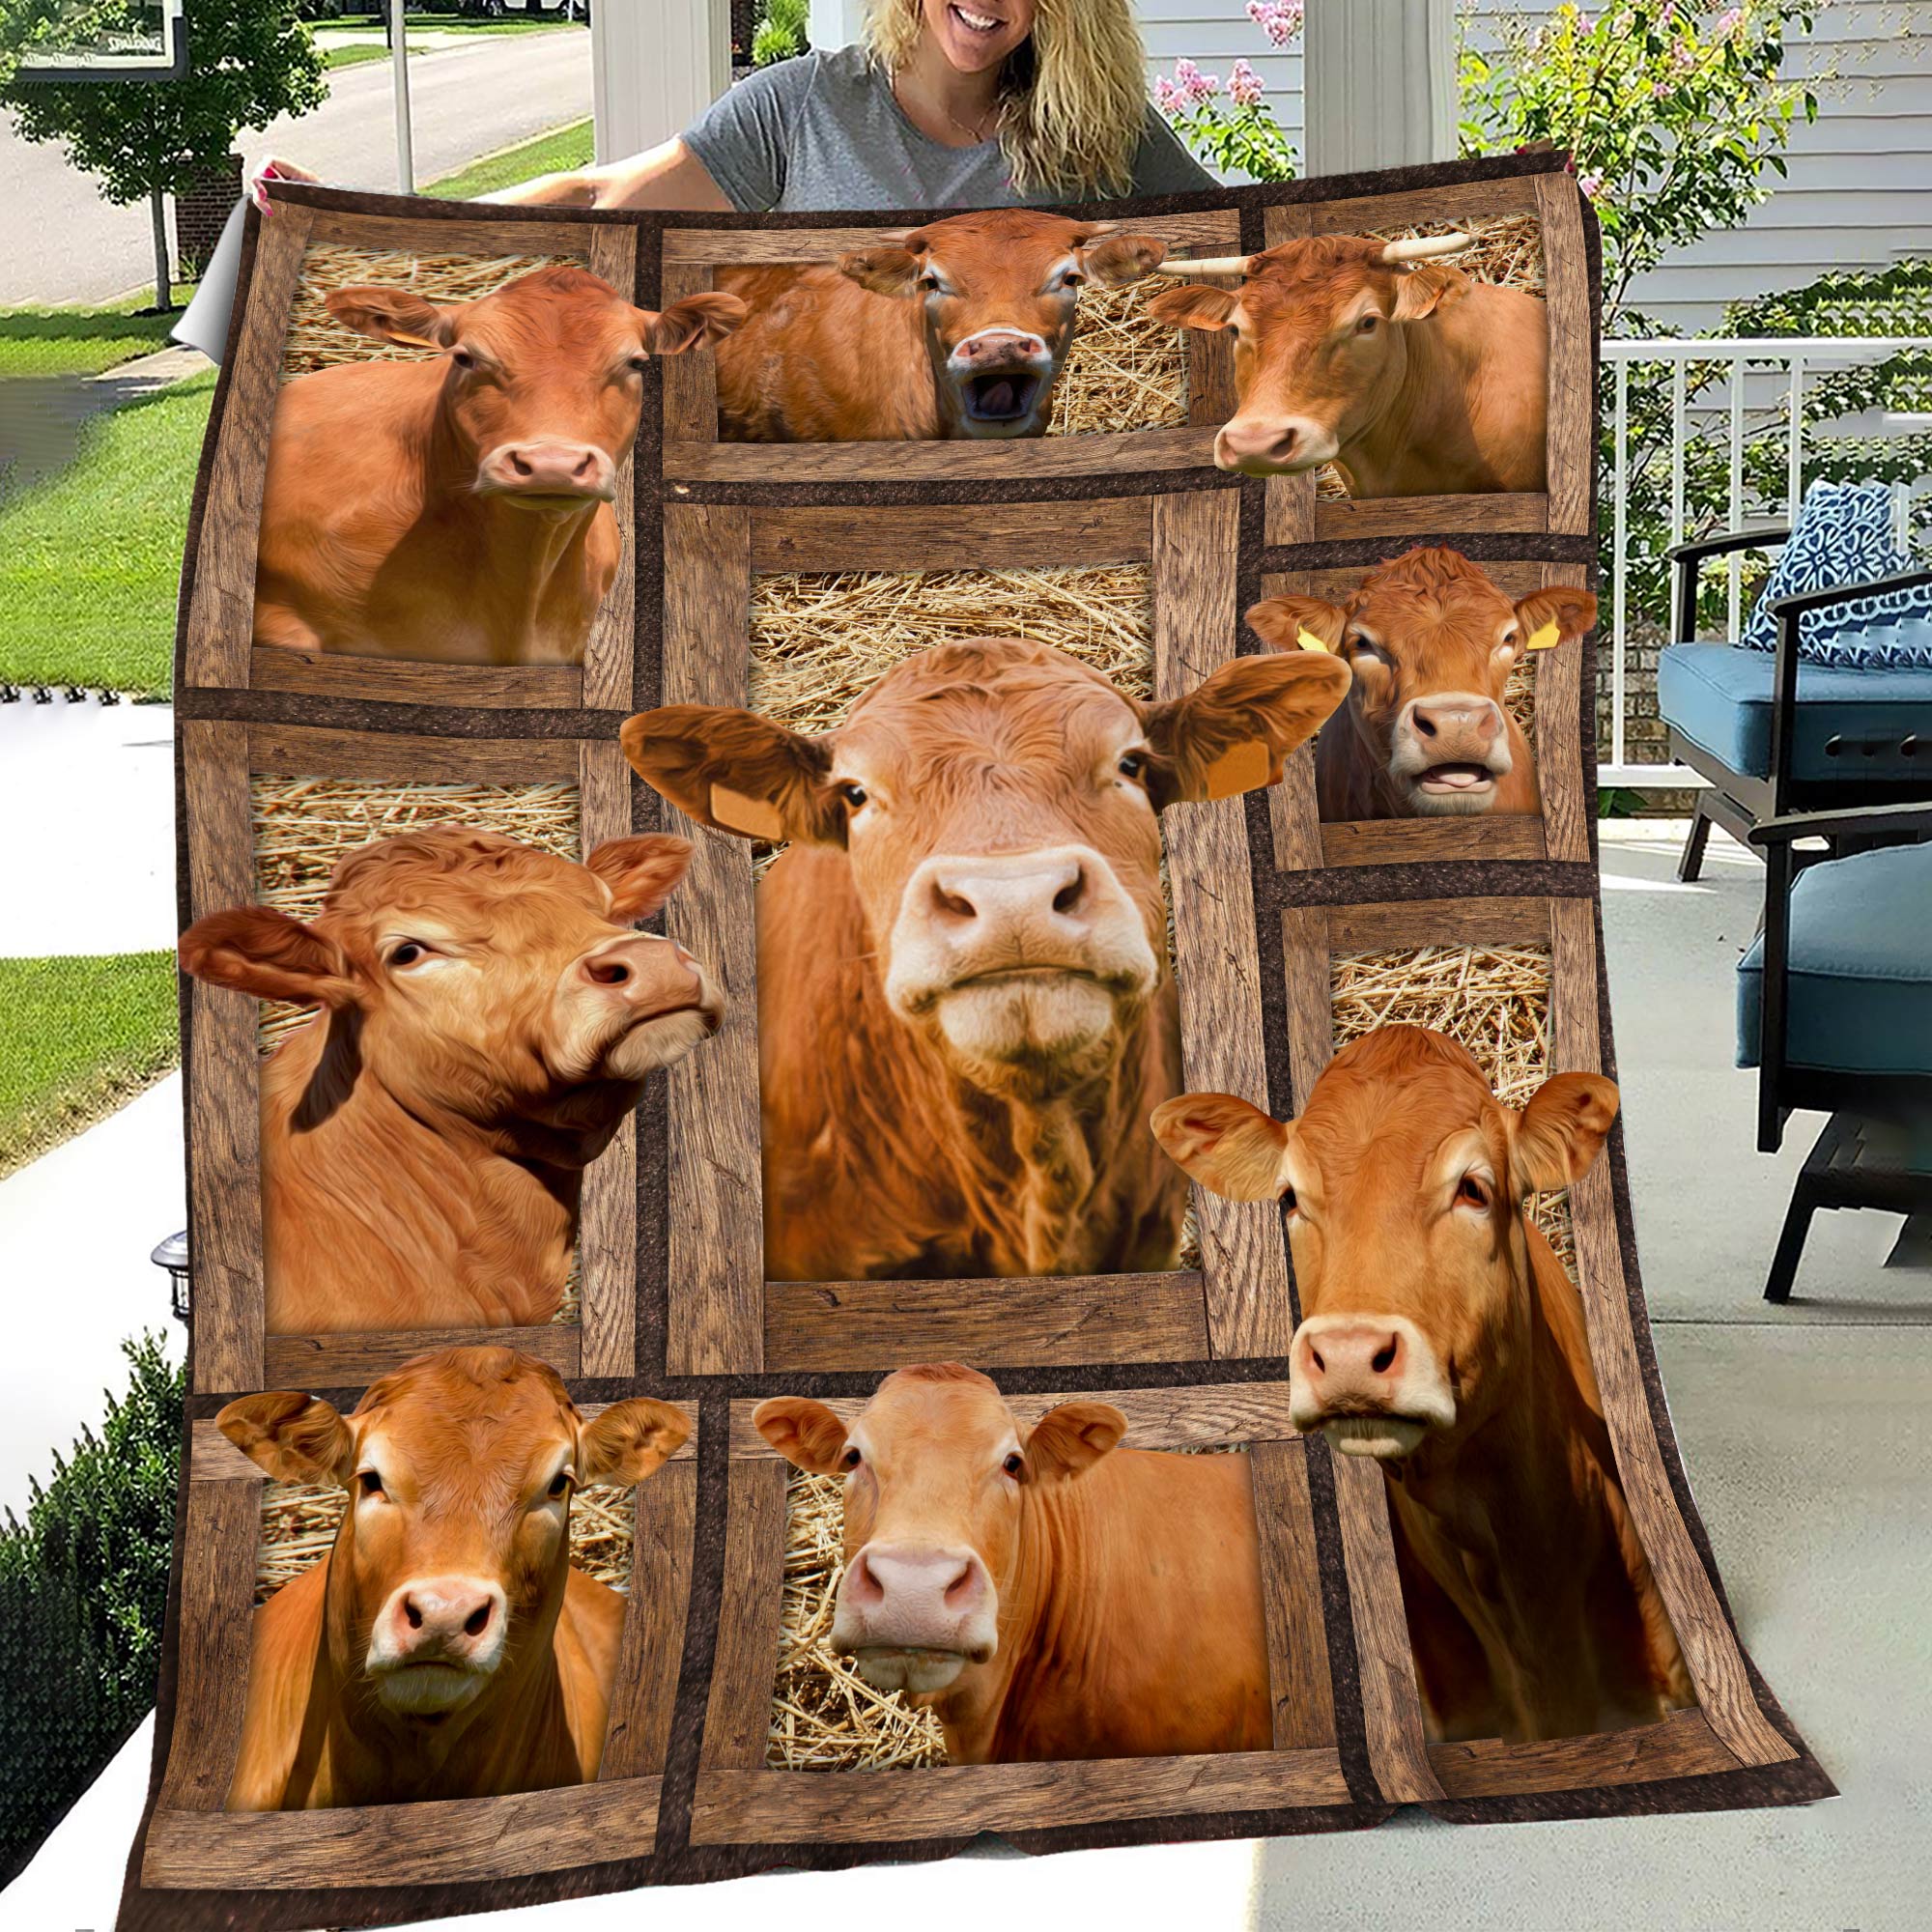 Limousin In Farm All Printed 3D Blanket